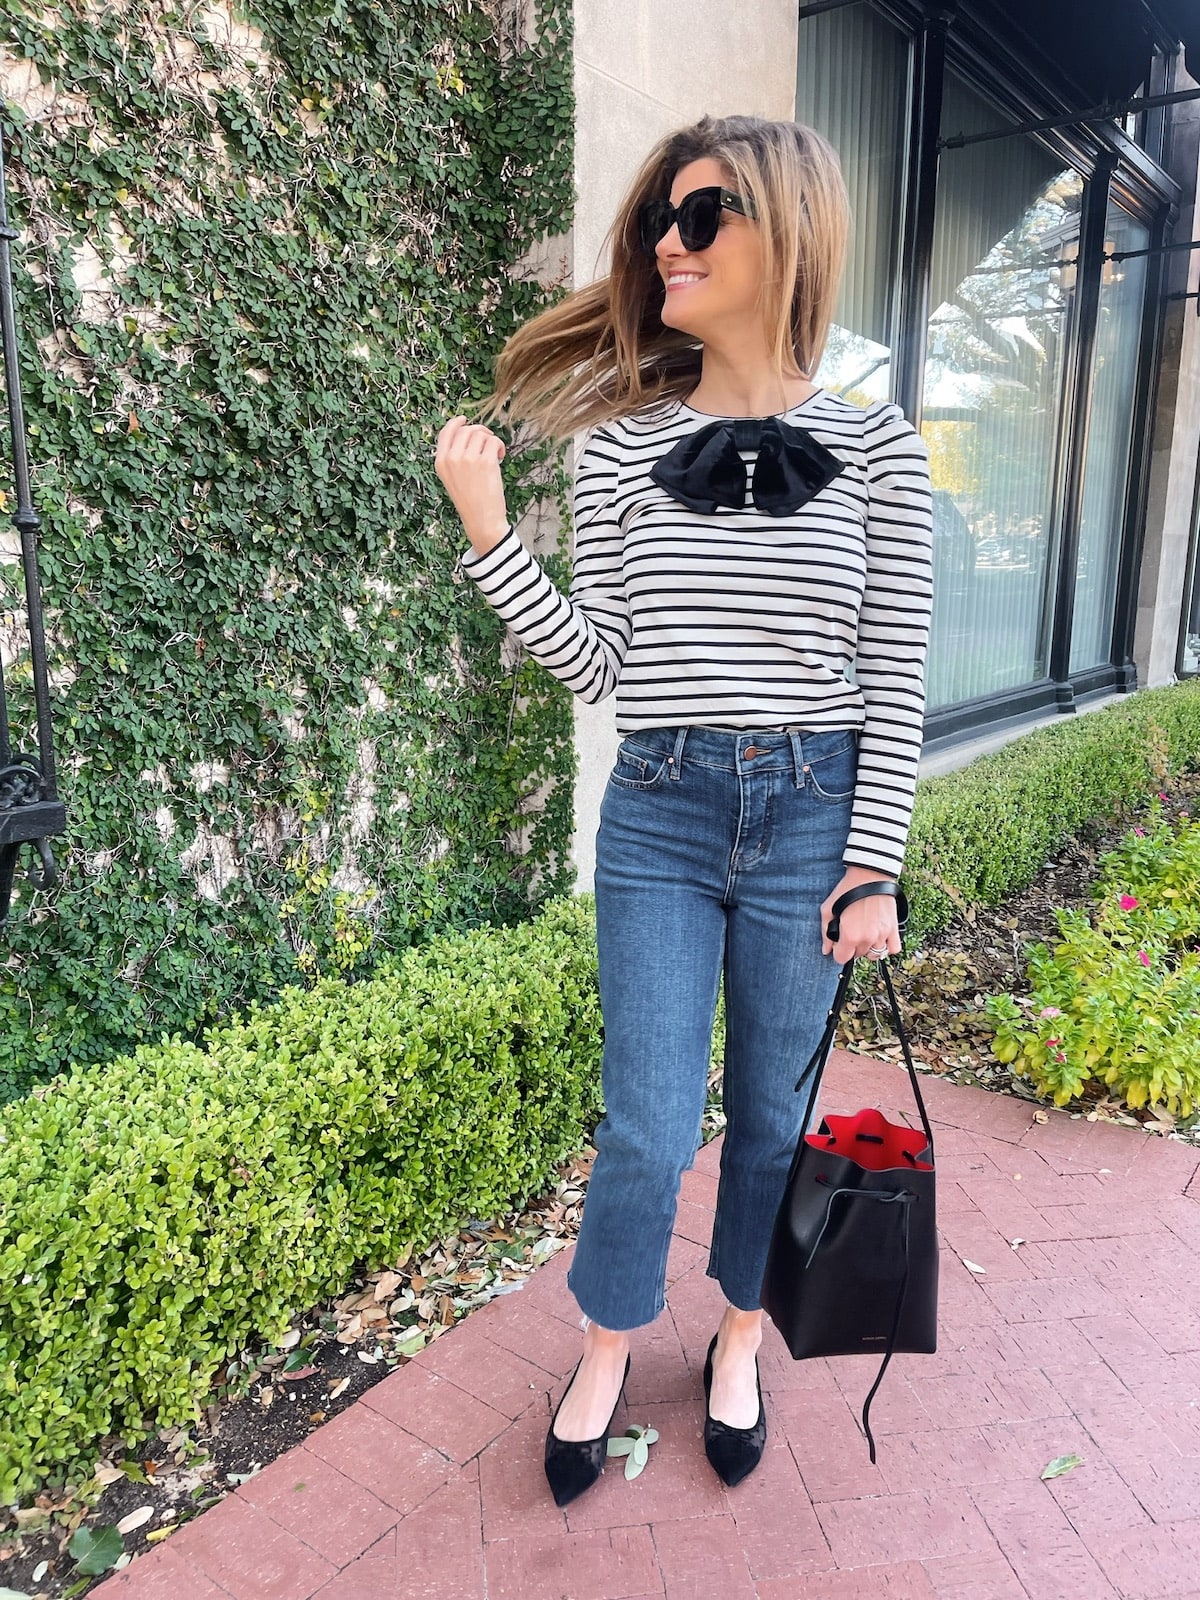 Brighton Butler wearing Boden striped top and jeans with black flats